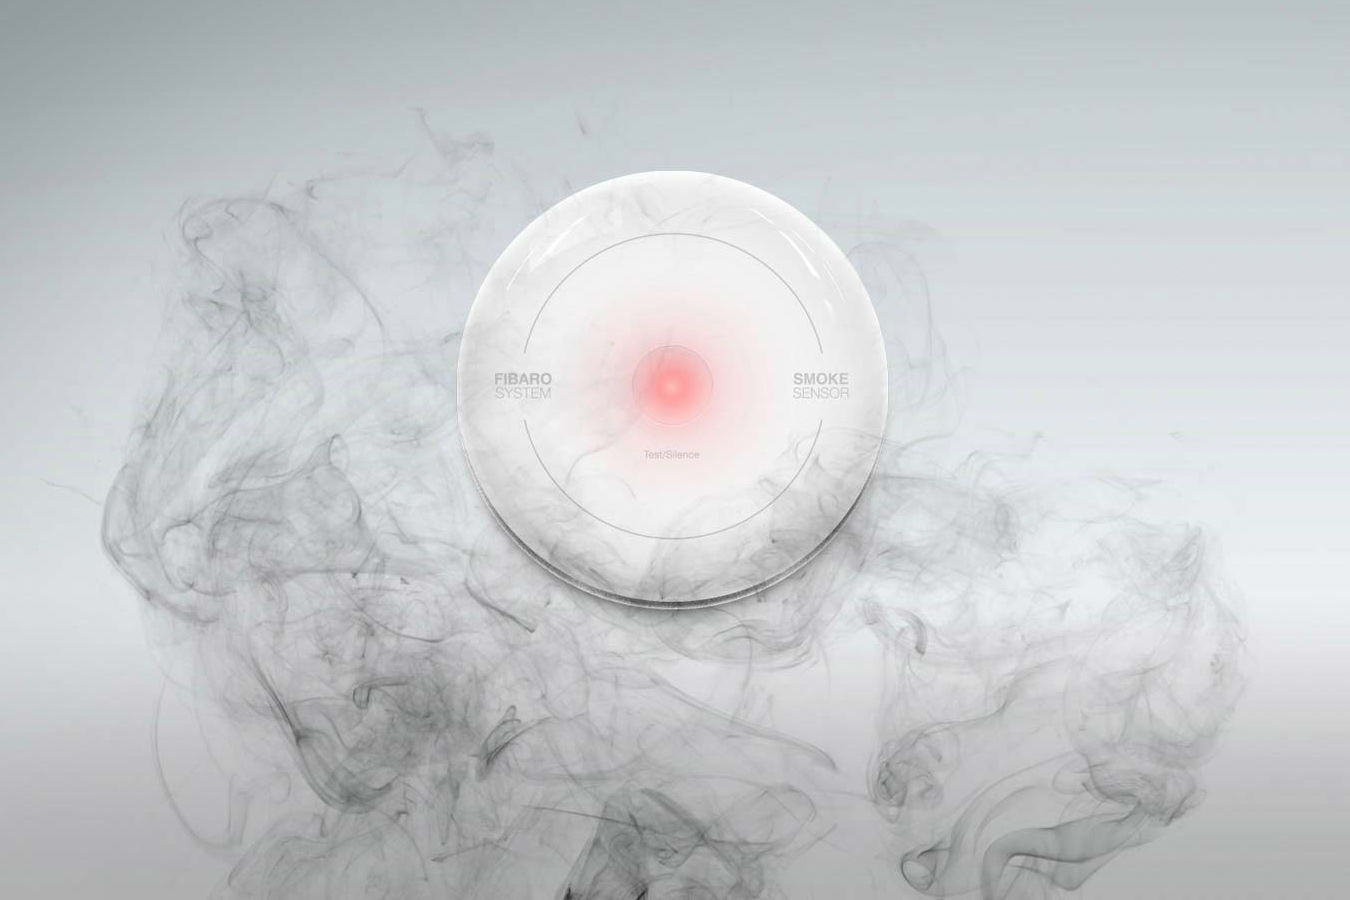 Top 3 Z-Wave smoke detectors to easily make safety scenes (with examples)